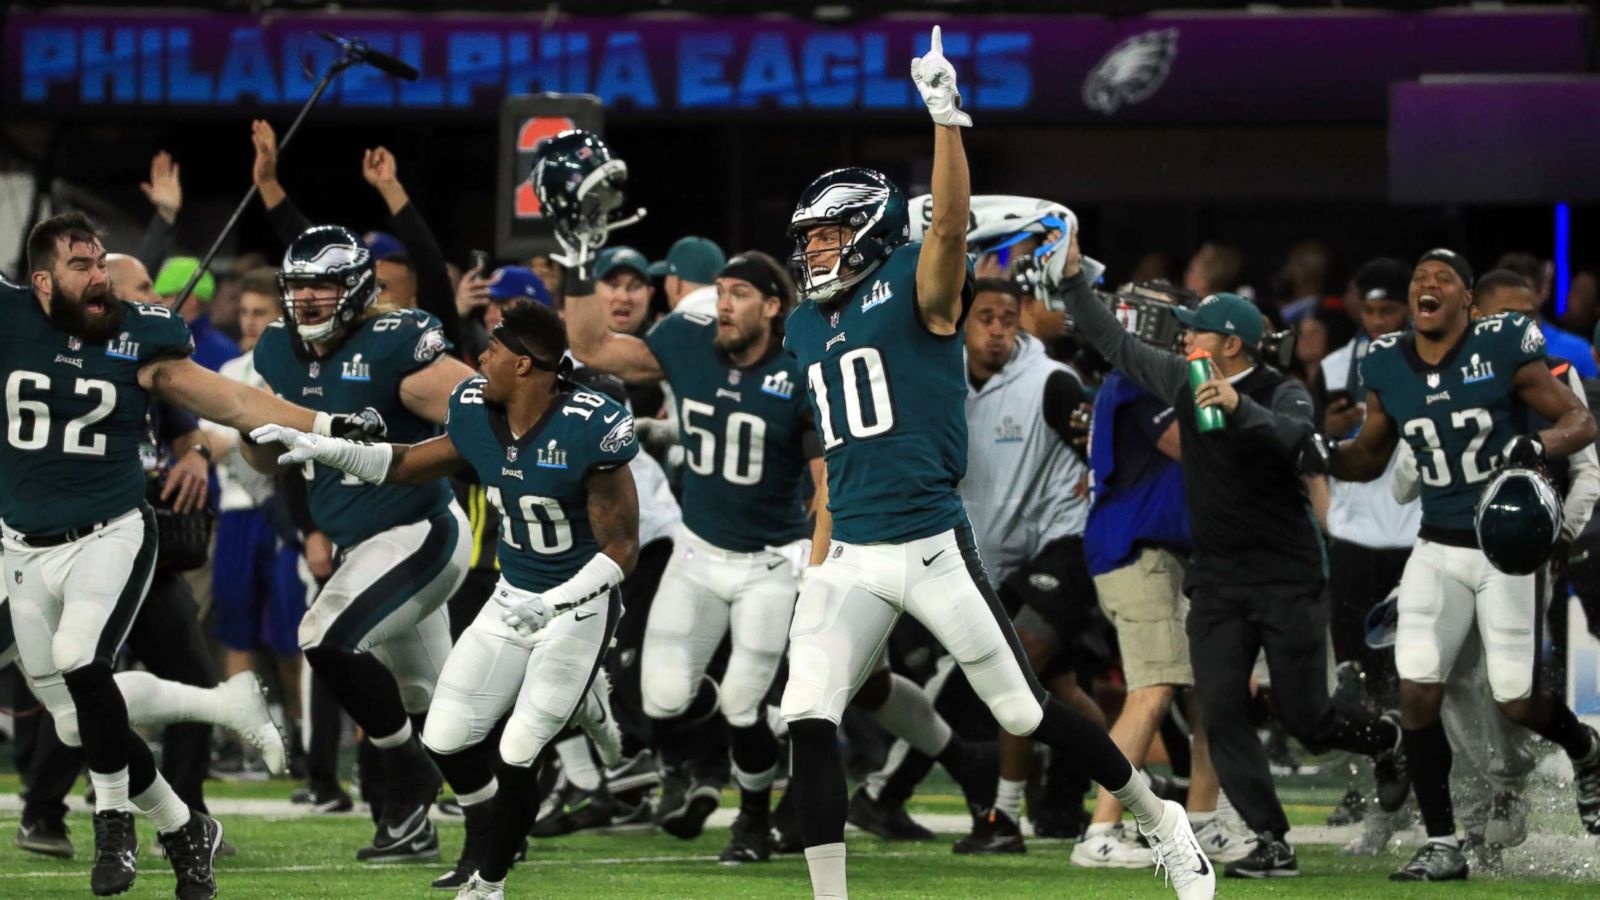 The Philadelphia Eagles are America's football team now. And Trump's feud  with them proves it.